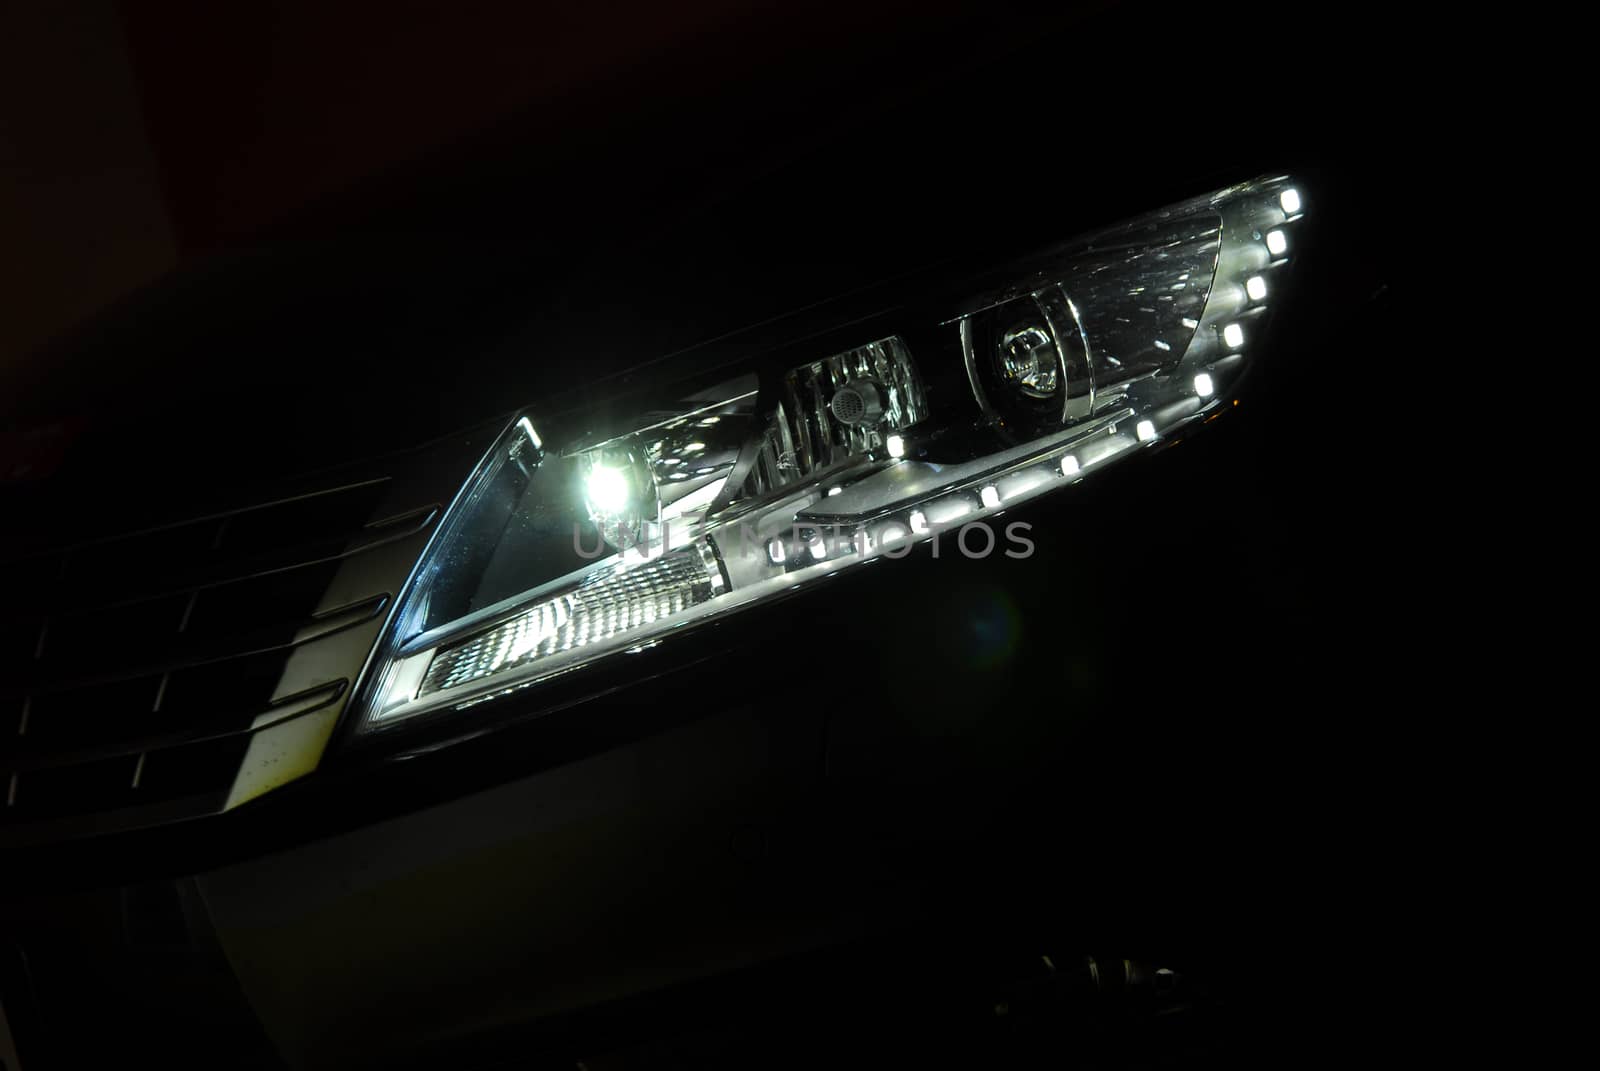 Car front headlight by aselsa